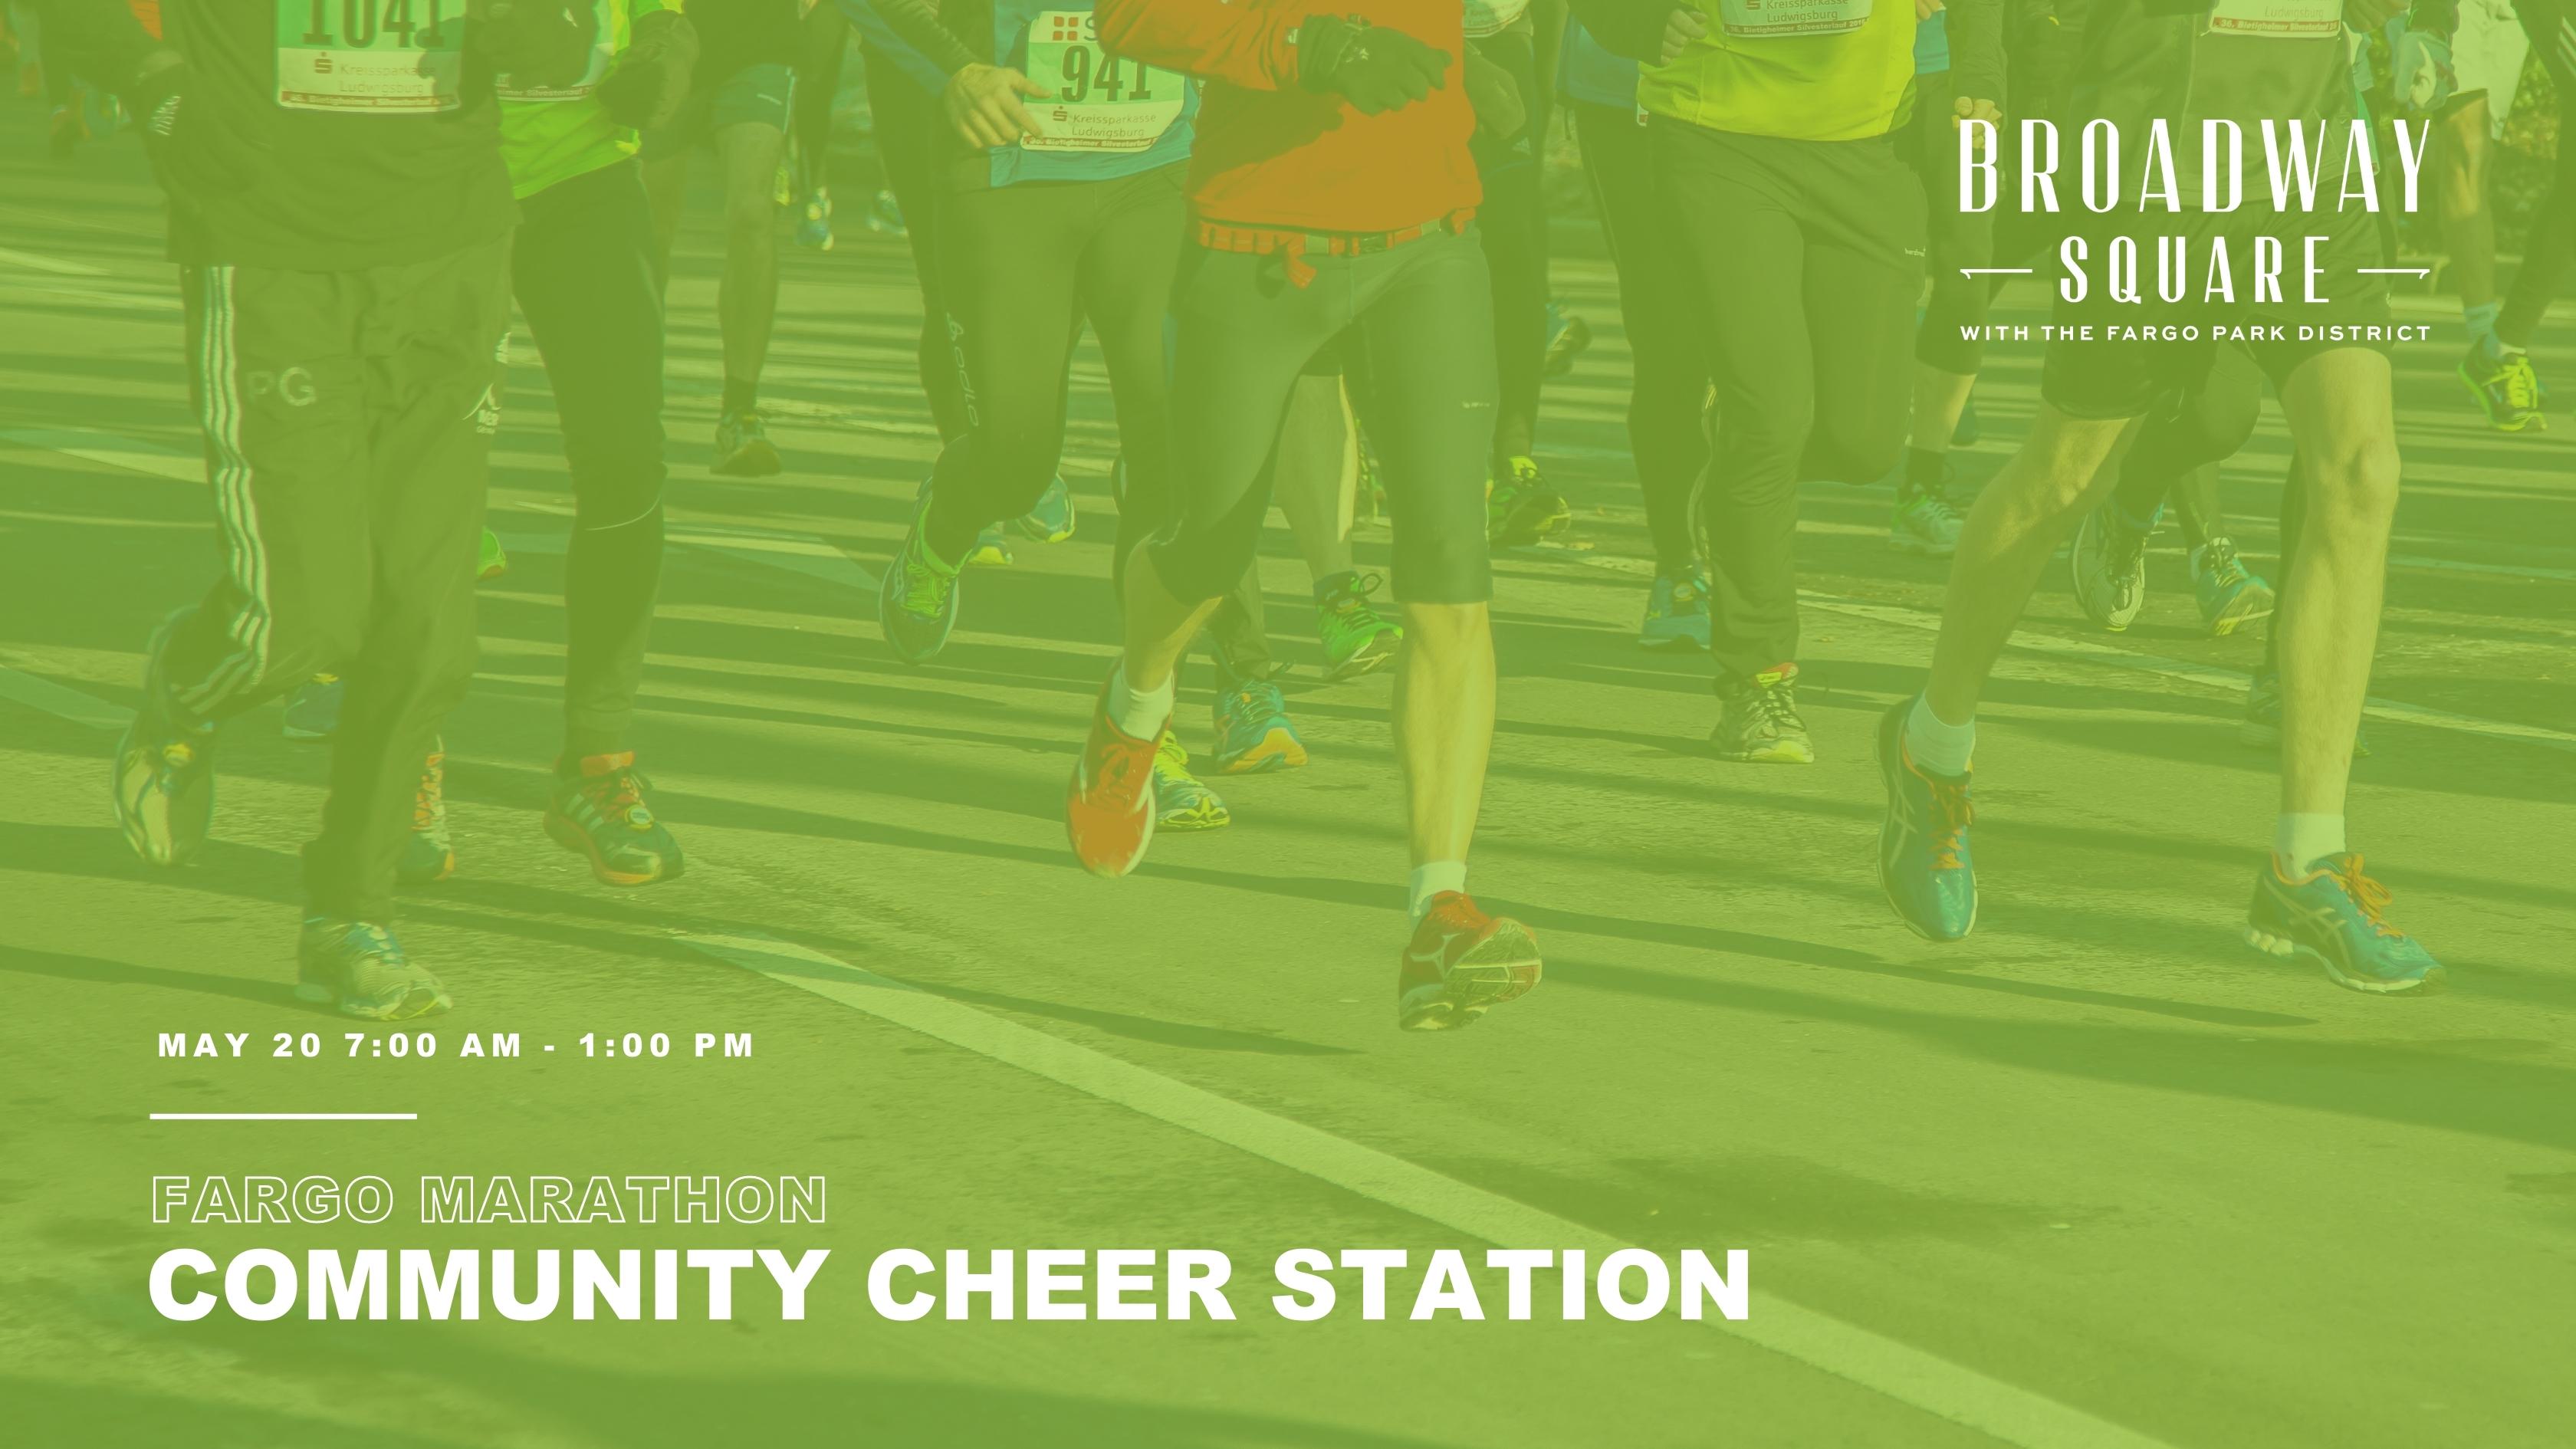 This graphic shows people running with community cheer station